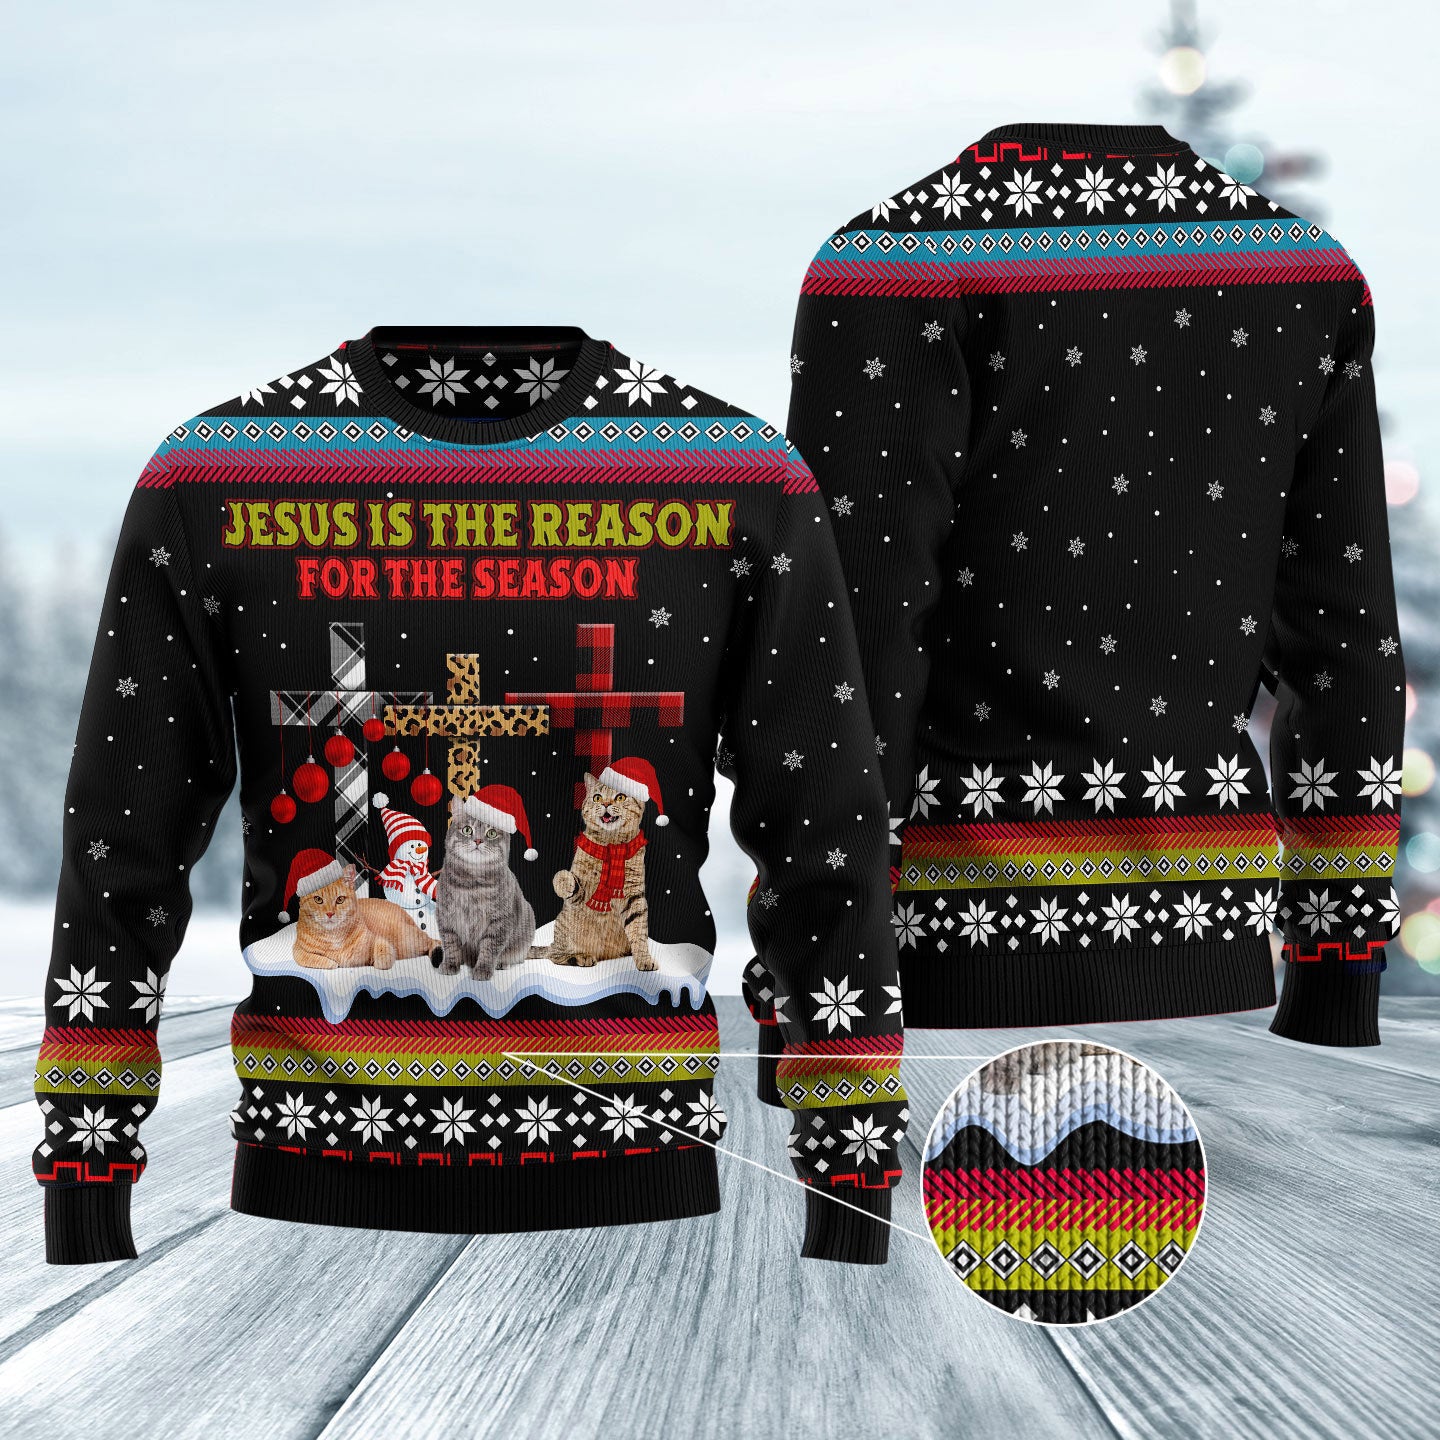 Jesus Is The Reason For The Season Cat Ugly Christmas Sweater  - Christmas Gift For Friends - Jesus Christ Sweater - Christian Shirts Gifts Idea